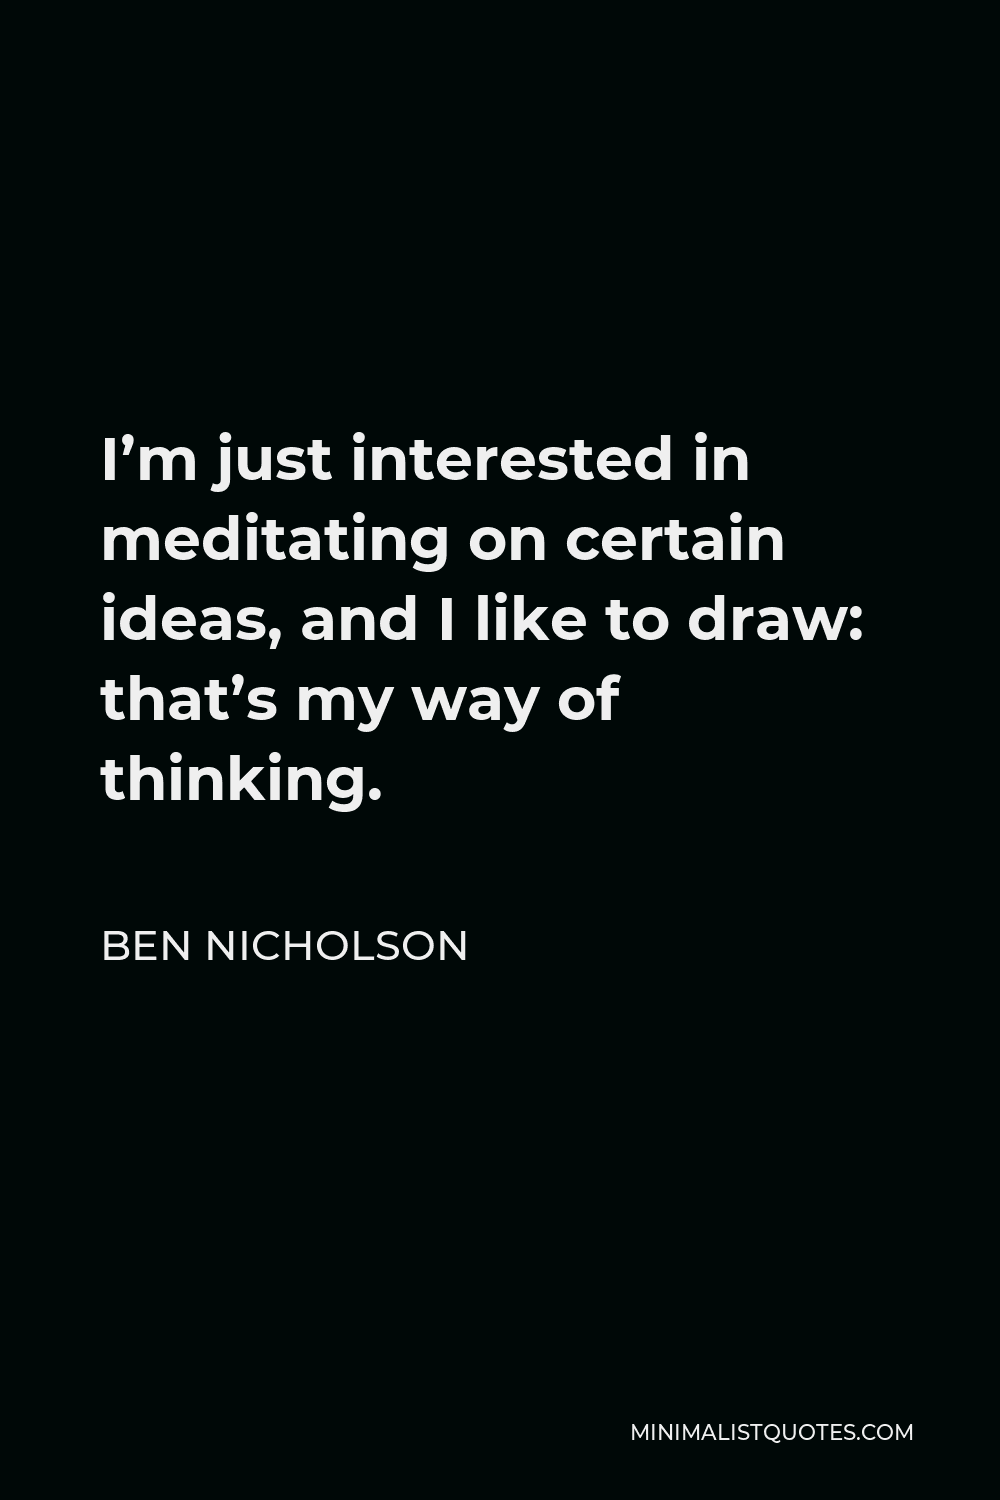 Ben Nicholson Quote - I’m just interested in meditating on certain ideas, and I like to draw: that’s my way of thinking.